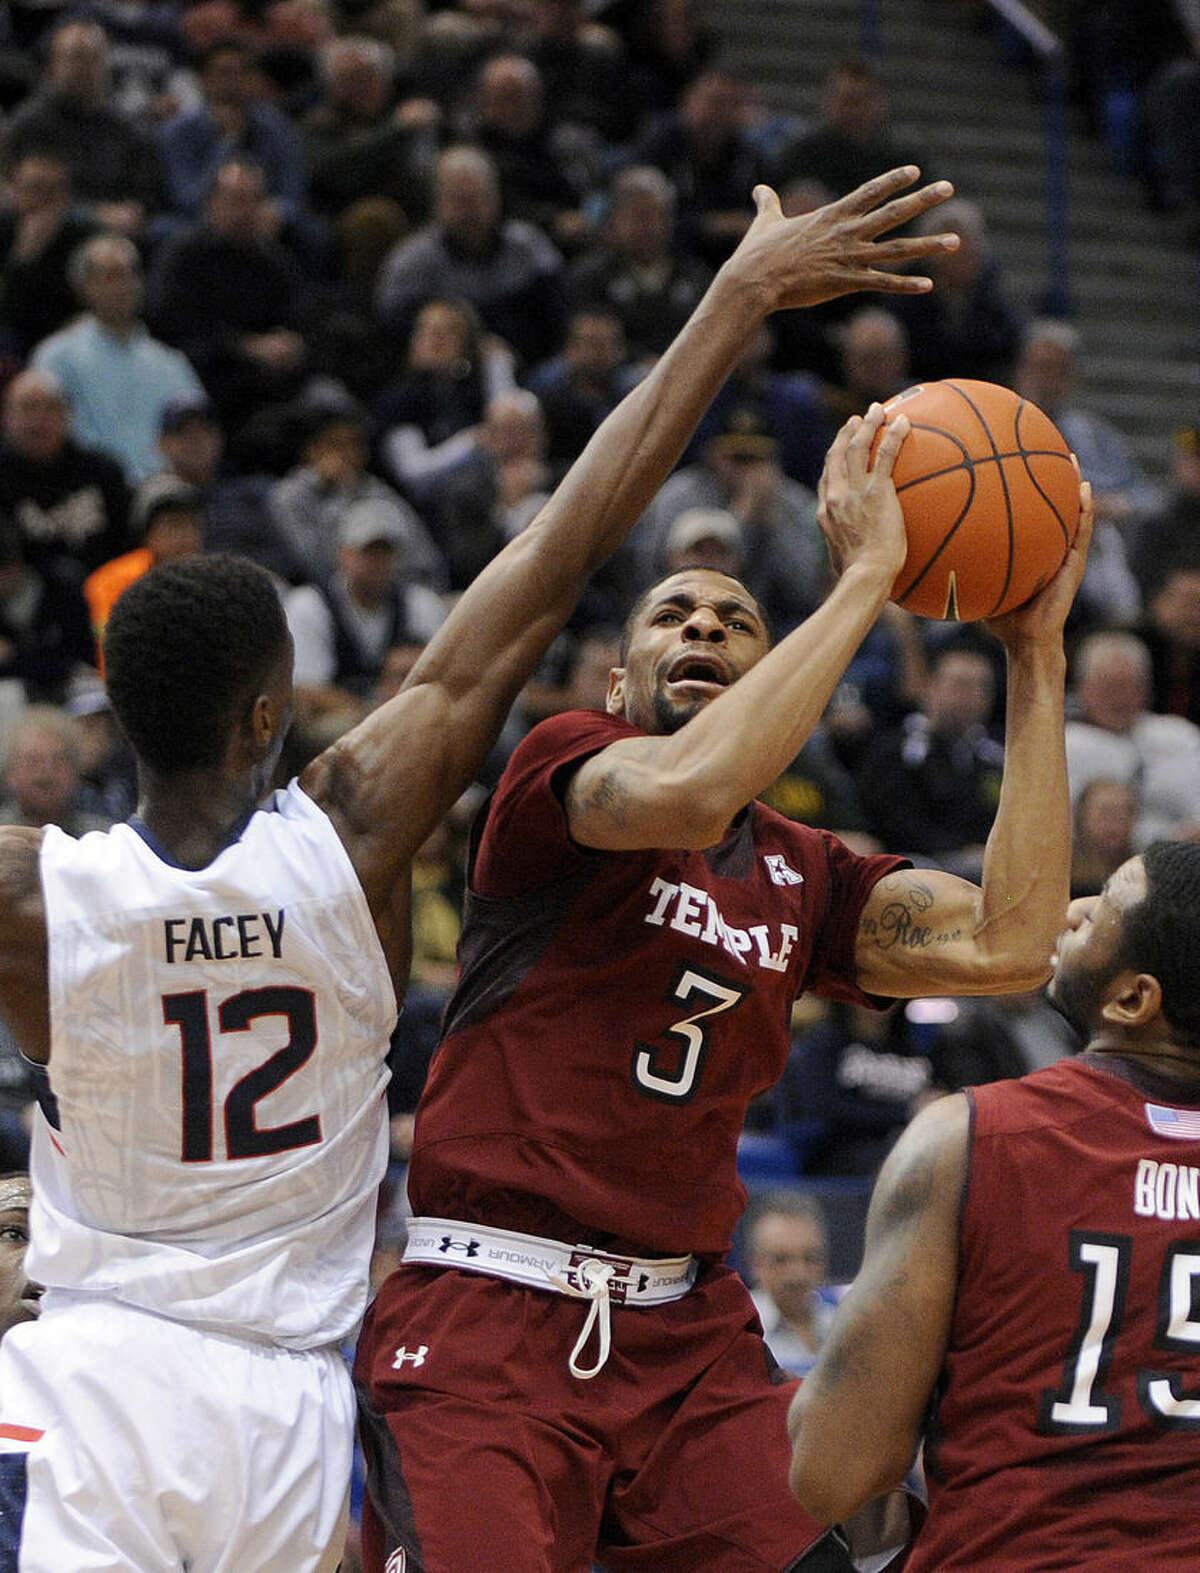 Temple's Jesse Morgan (3) drives past Connecticut's Kentan Facey (12) during the first half of an NCAA college basketball game in Hartford, Conn., on Wednesday, Dec. 31, 2014. (AP Photo/Fred Beckham)